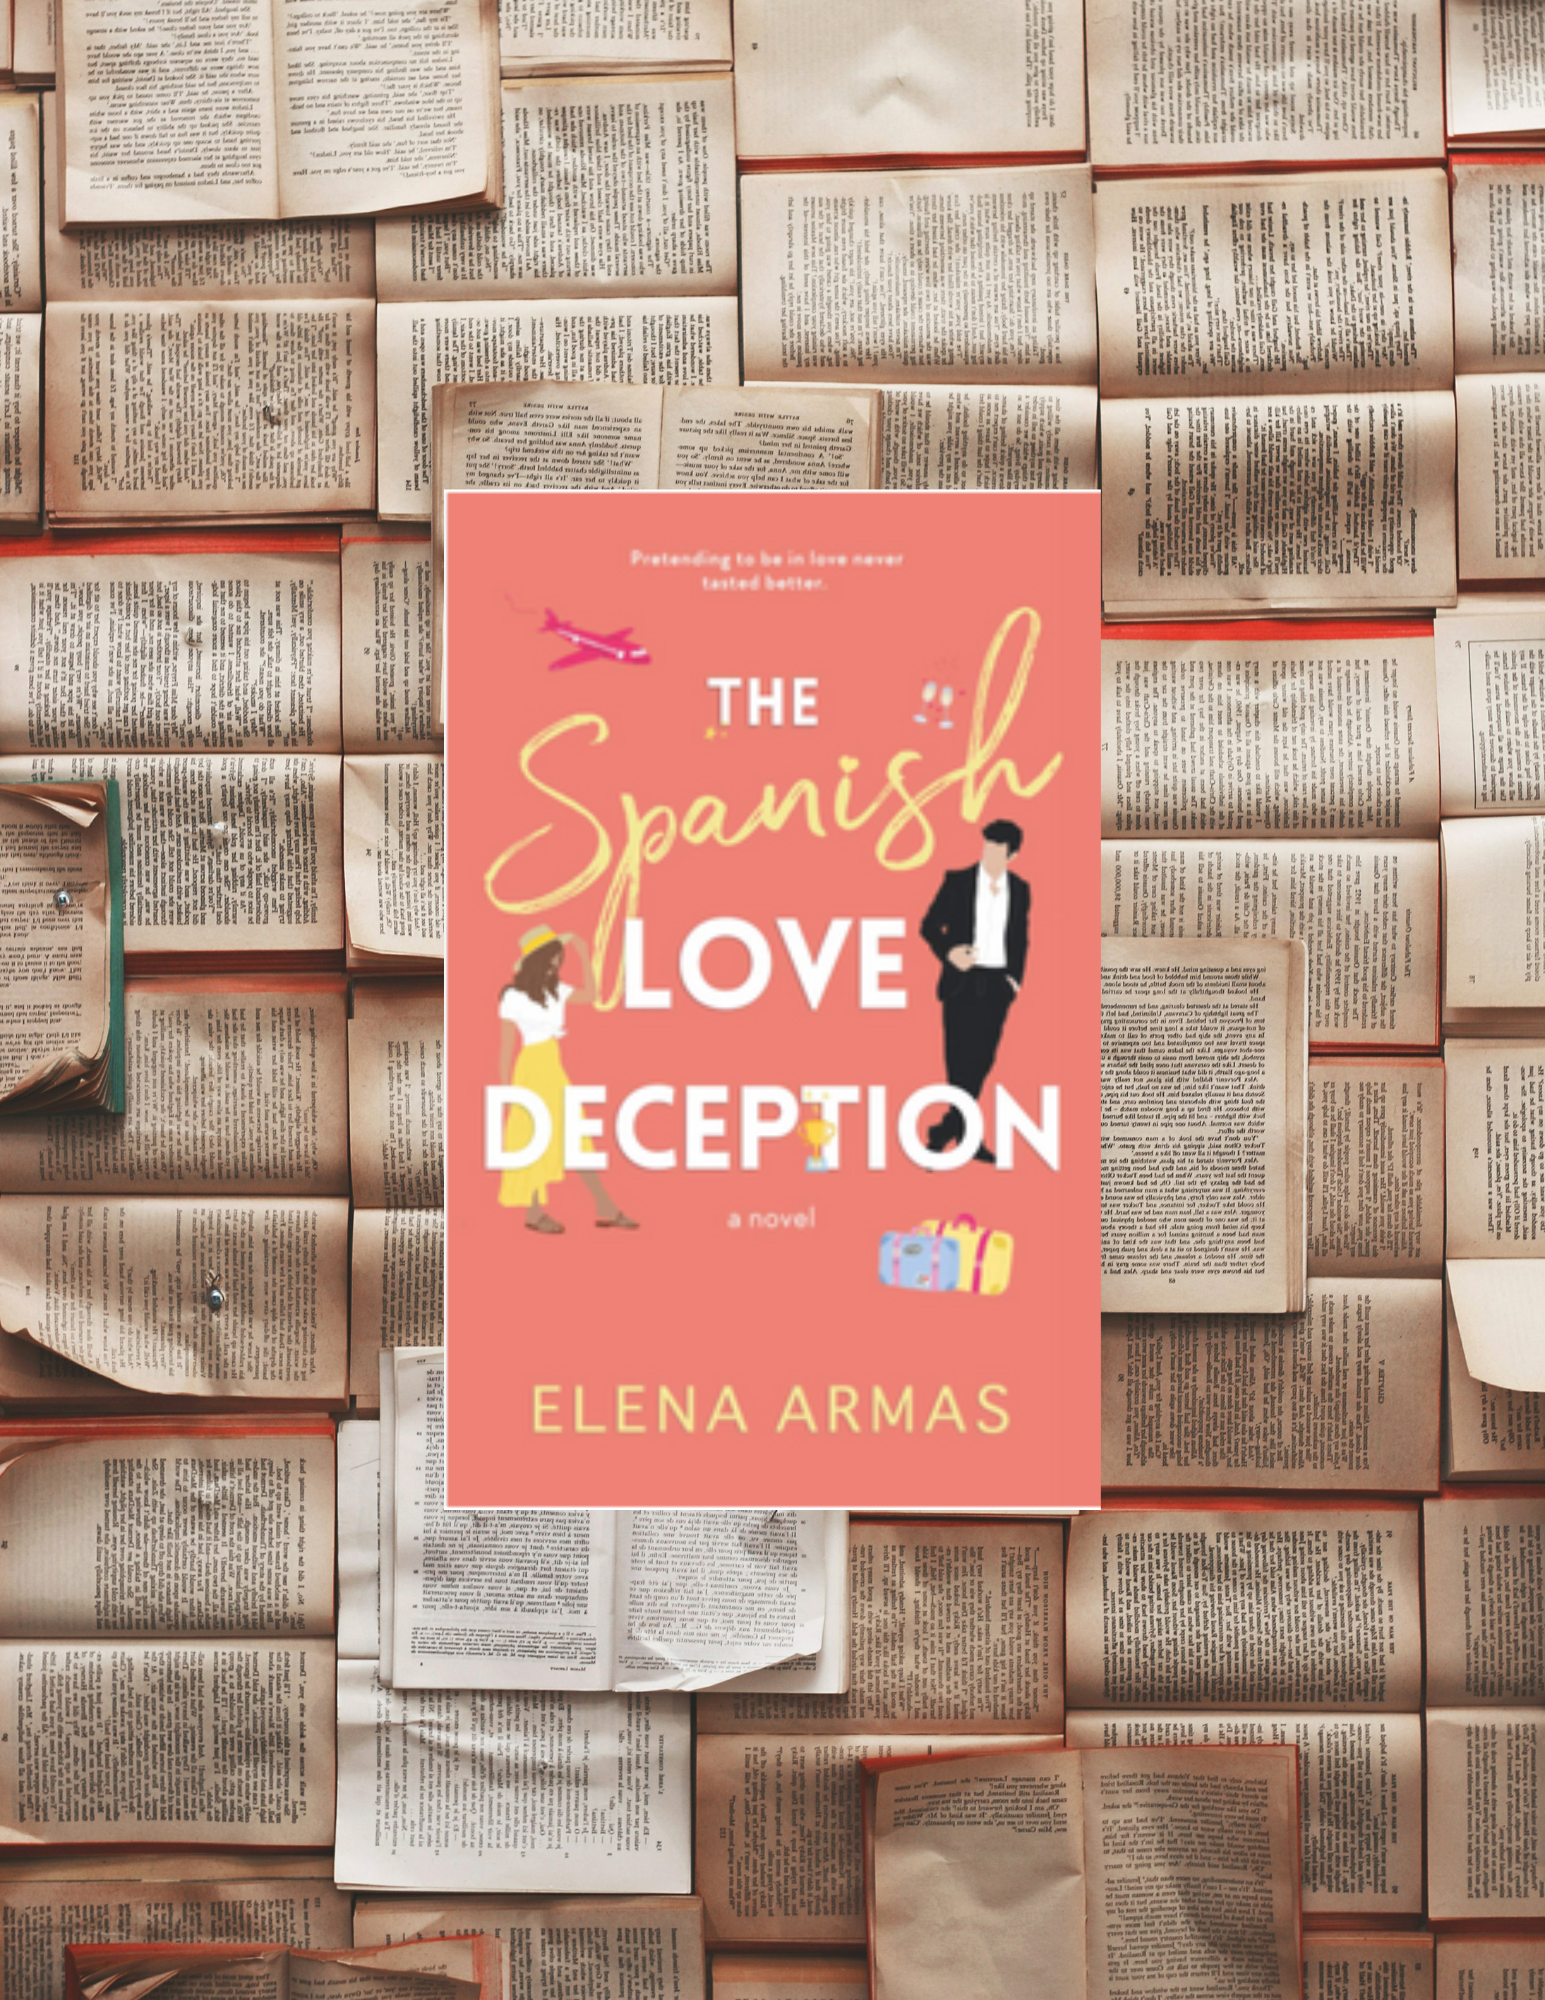 The Spanish Love Deception Book Review